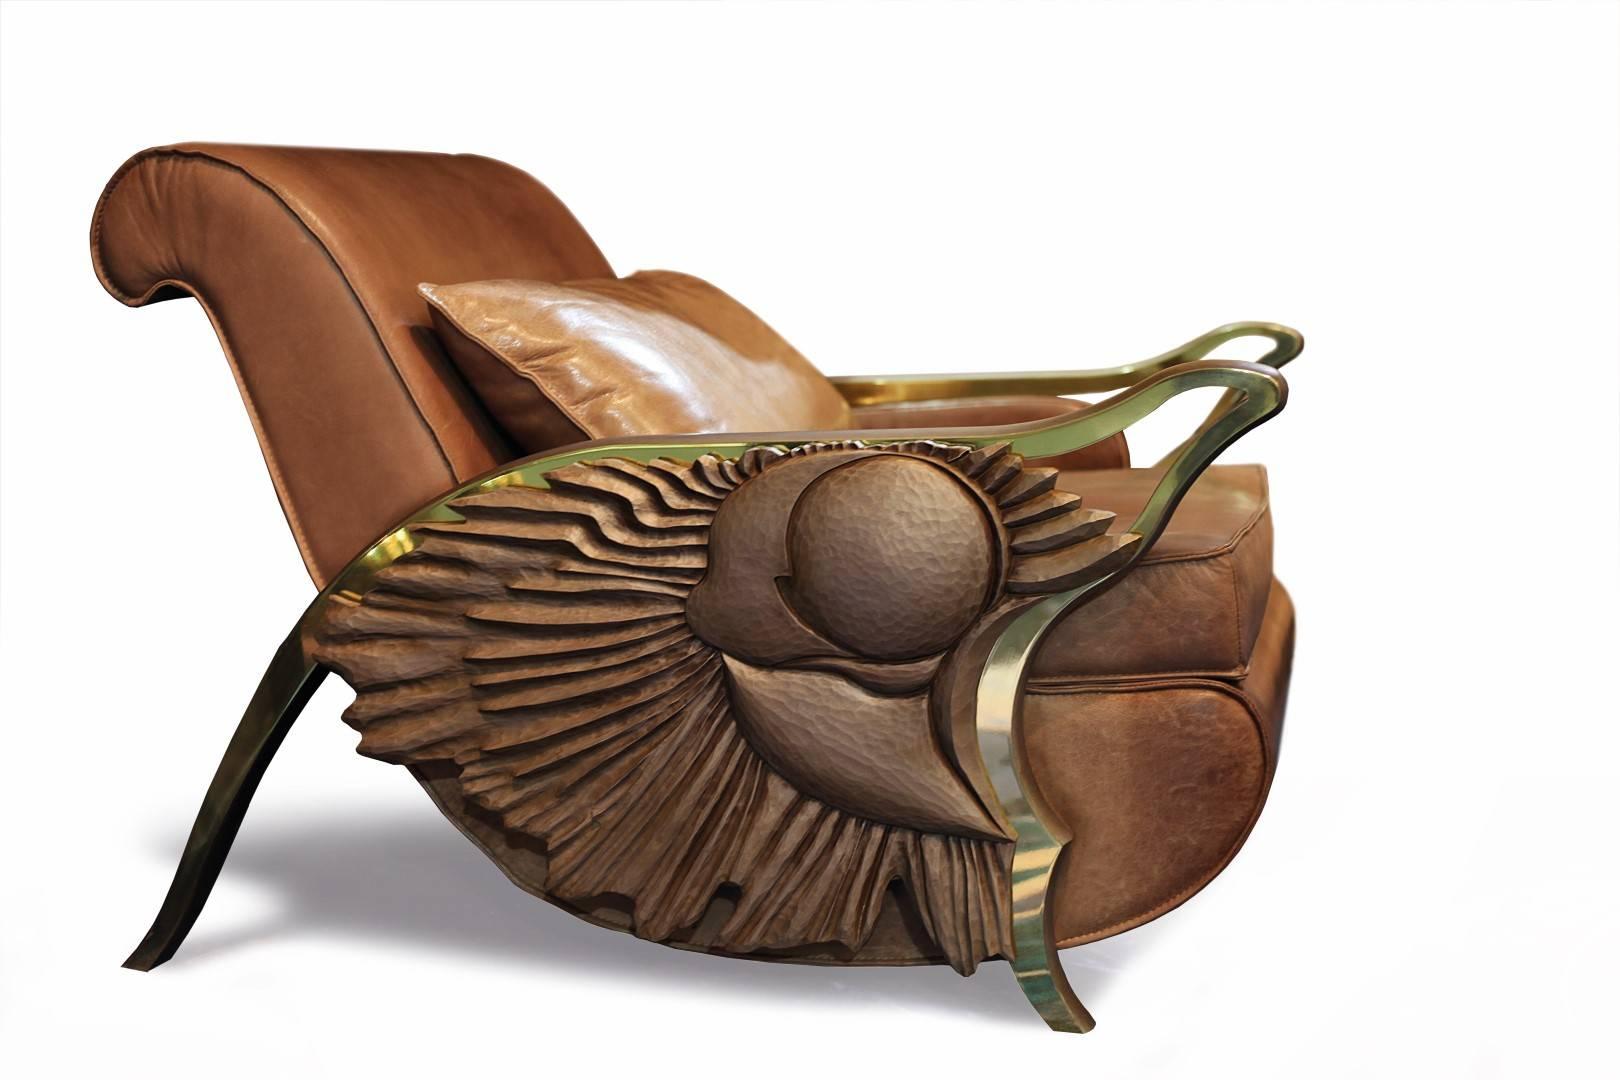 Modern 'Eternity' Limited Edition Lounge Armchair from Egli Design